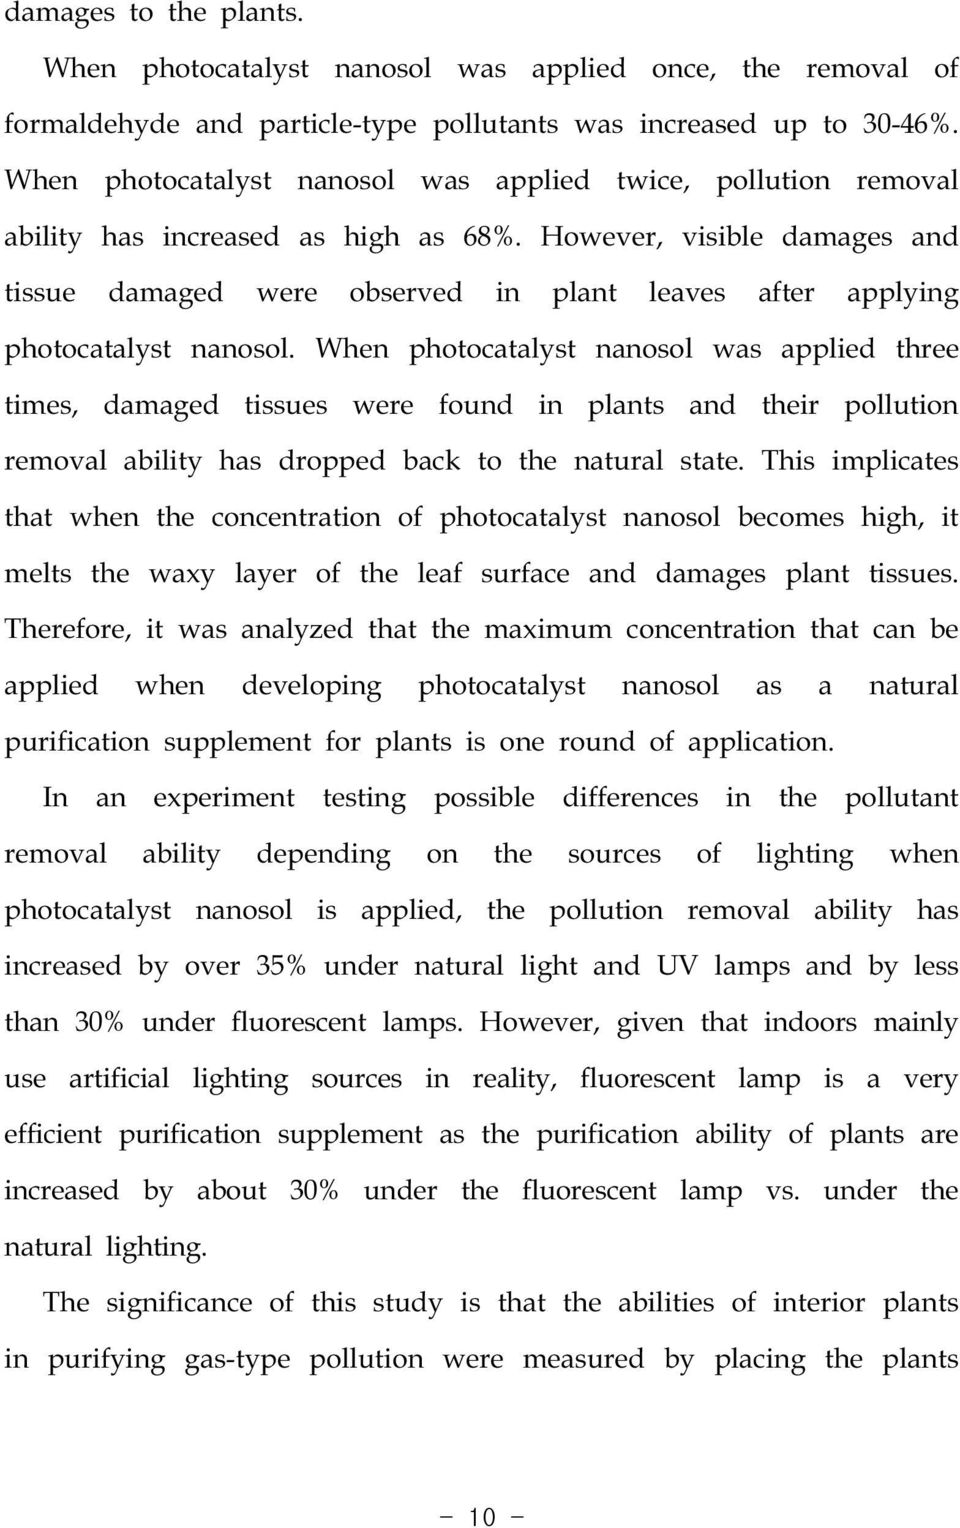 However, visible damages and tissue damaged were observed in plant leaves after applying photocatalyst nanosol.